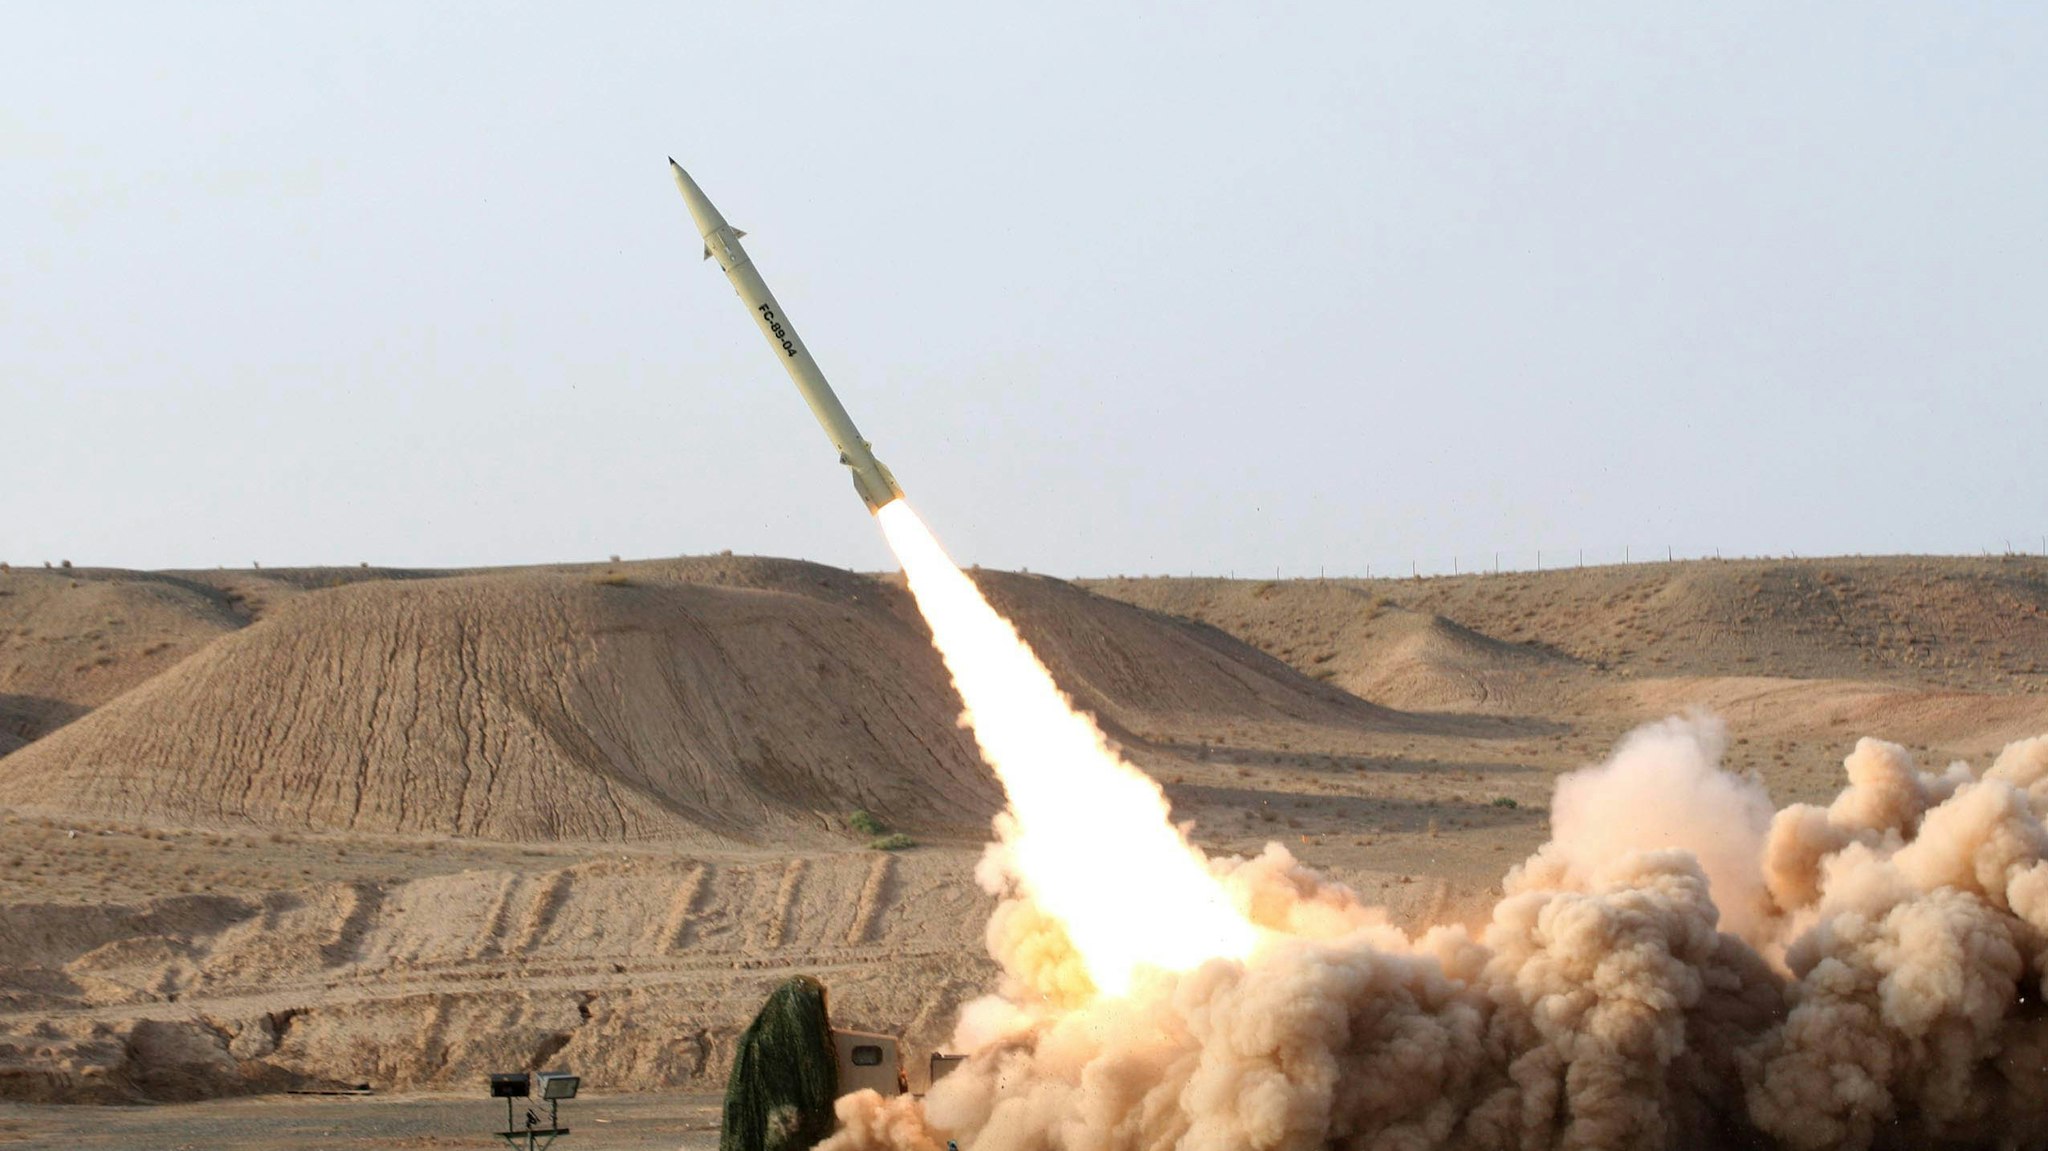 Iran has test fired its home-built surface-to-surface Fateh 110 missile, state television reported on Wednesday, less than a week after a similar test was carried out on another missile 25 August